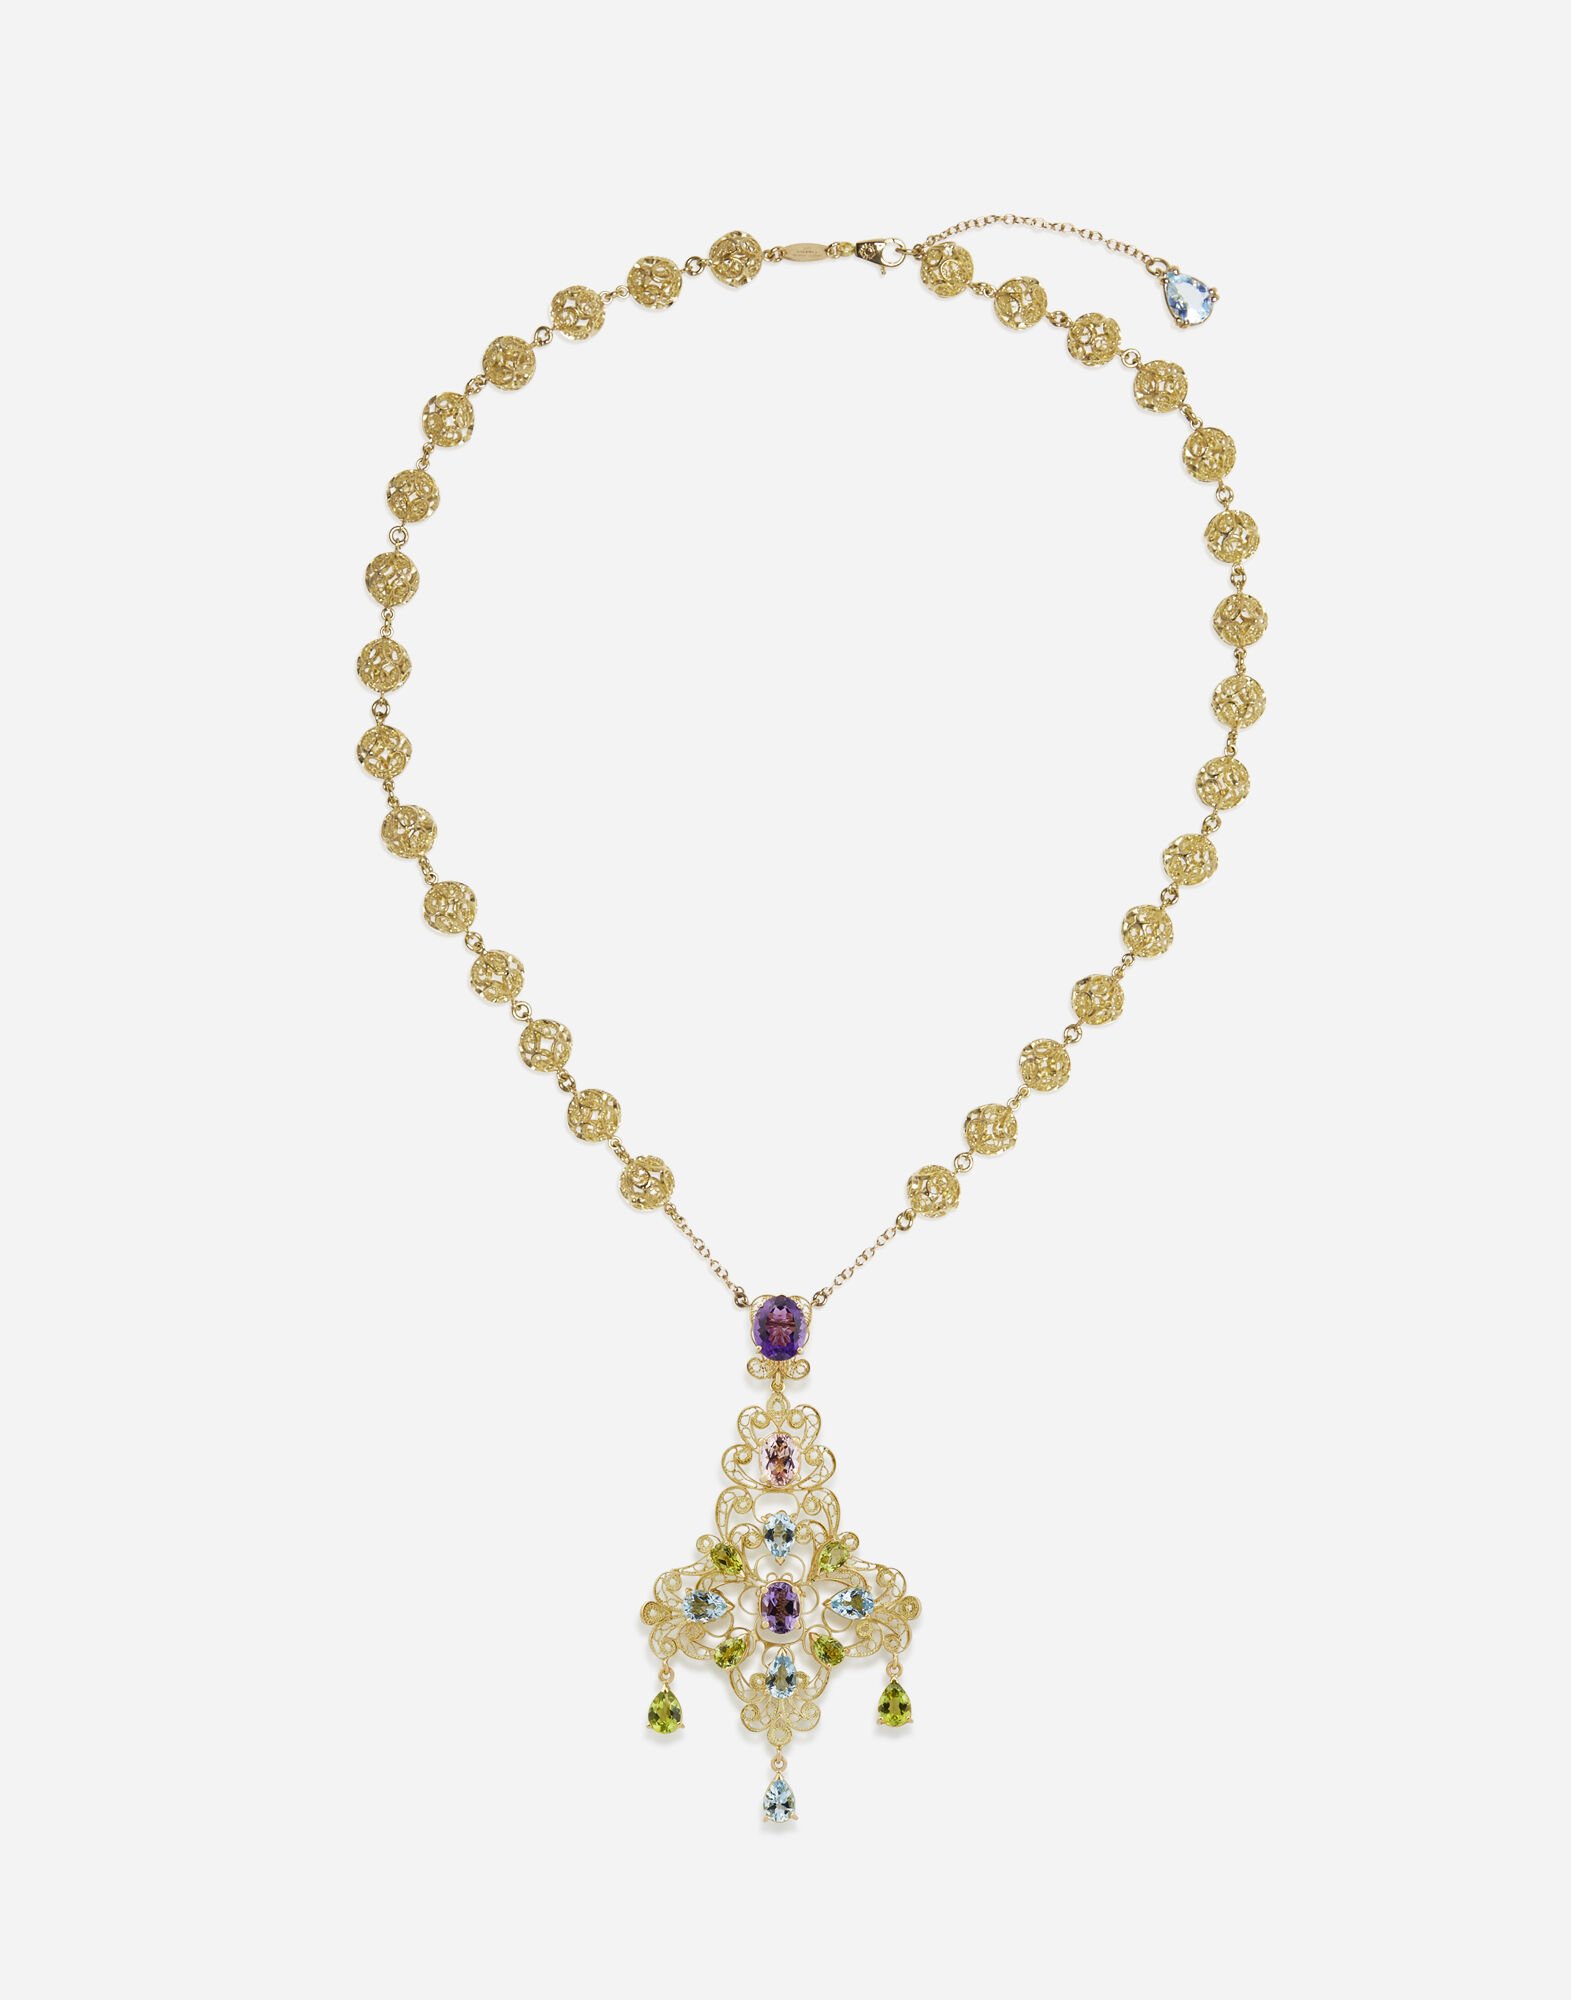 Dolce & Gabbana Pizzo necklace in yellow gold filigree with amethysts, aquamarines, peridots and morganite Leo Print WWJC2SXCMDT